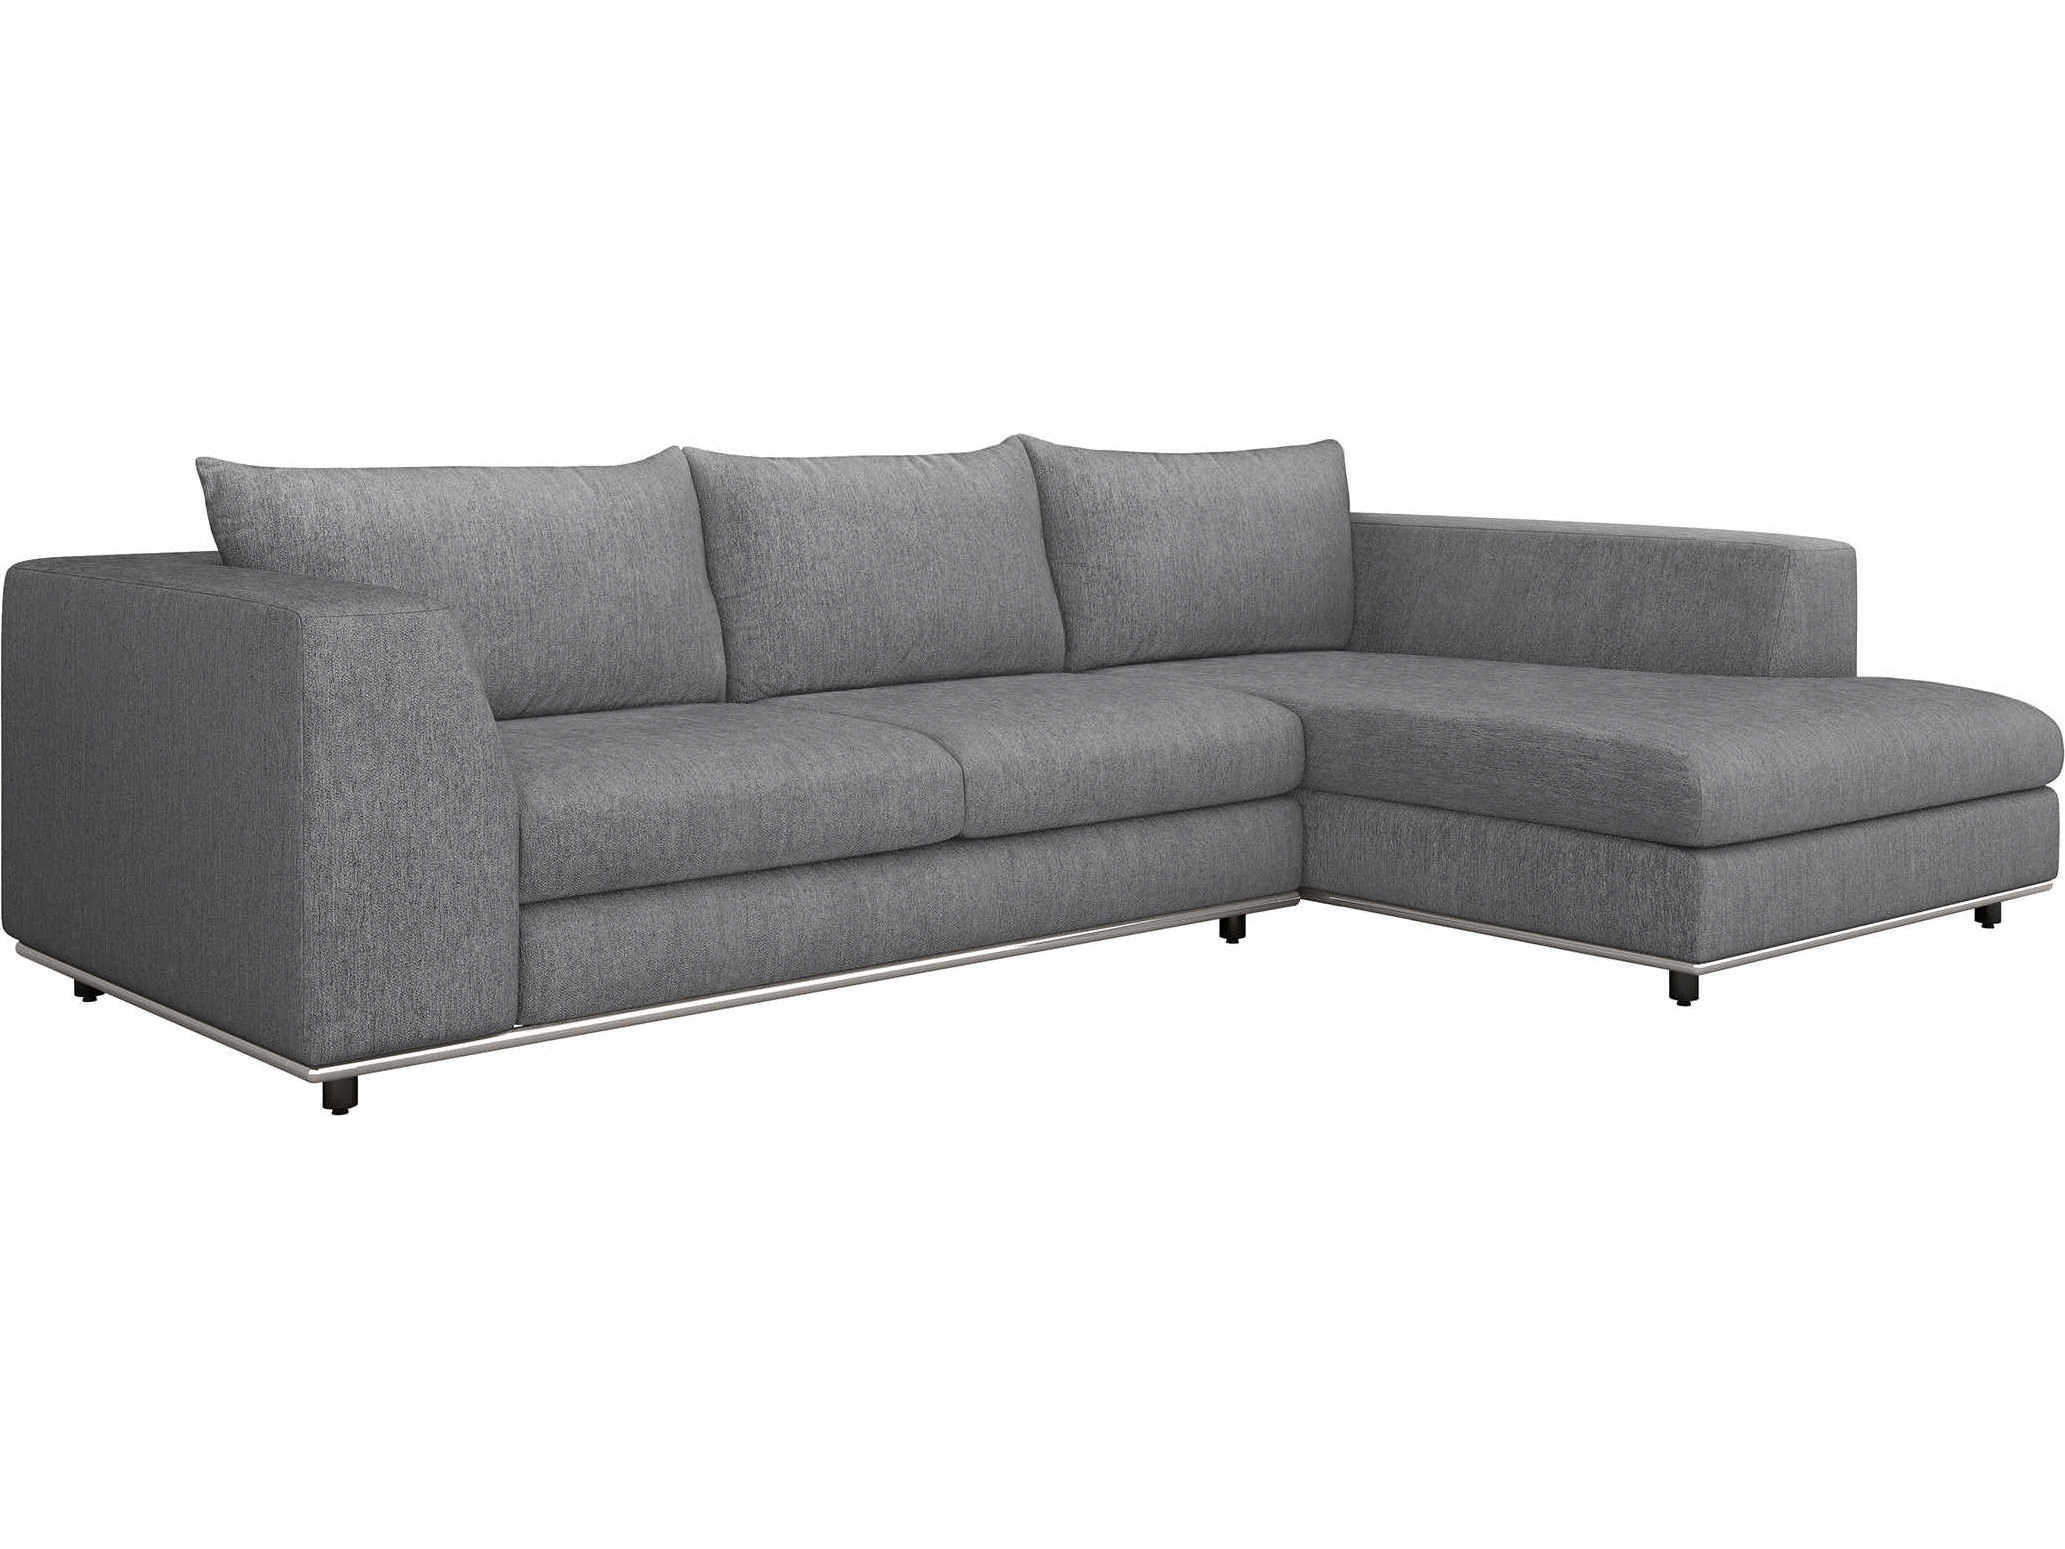 Interlude Home Comodo Night / Polished Nickel Two-Piece Sectional Sofa ...